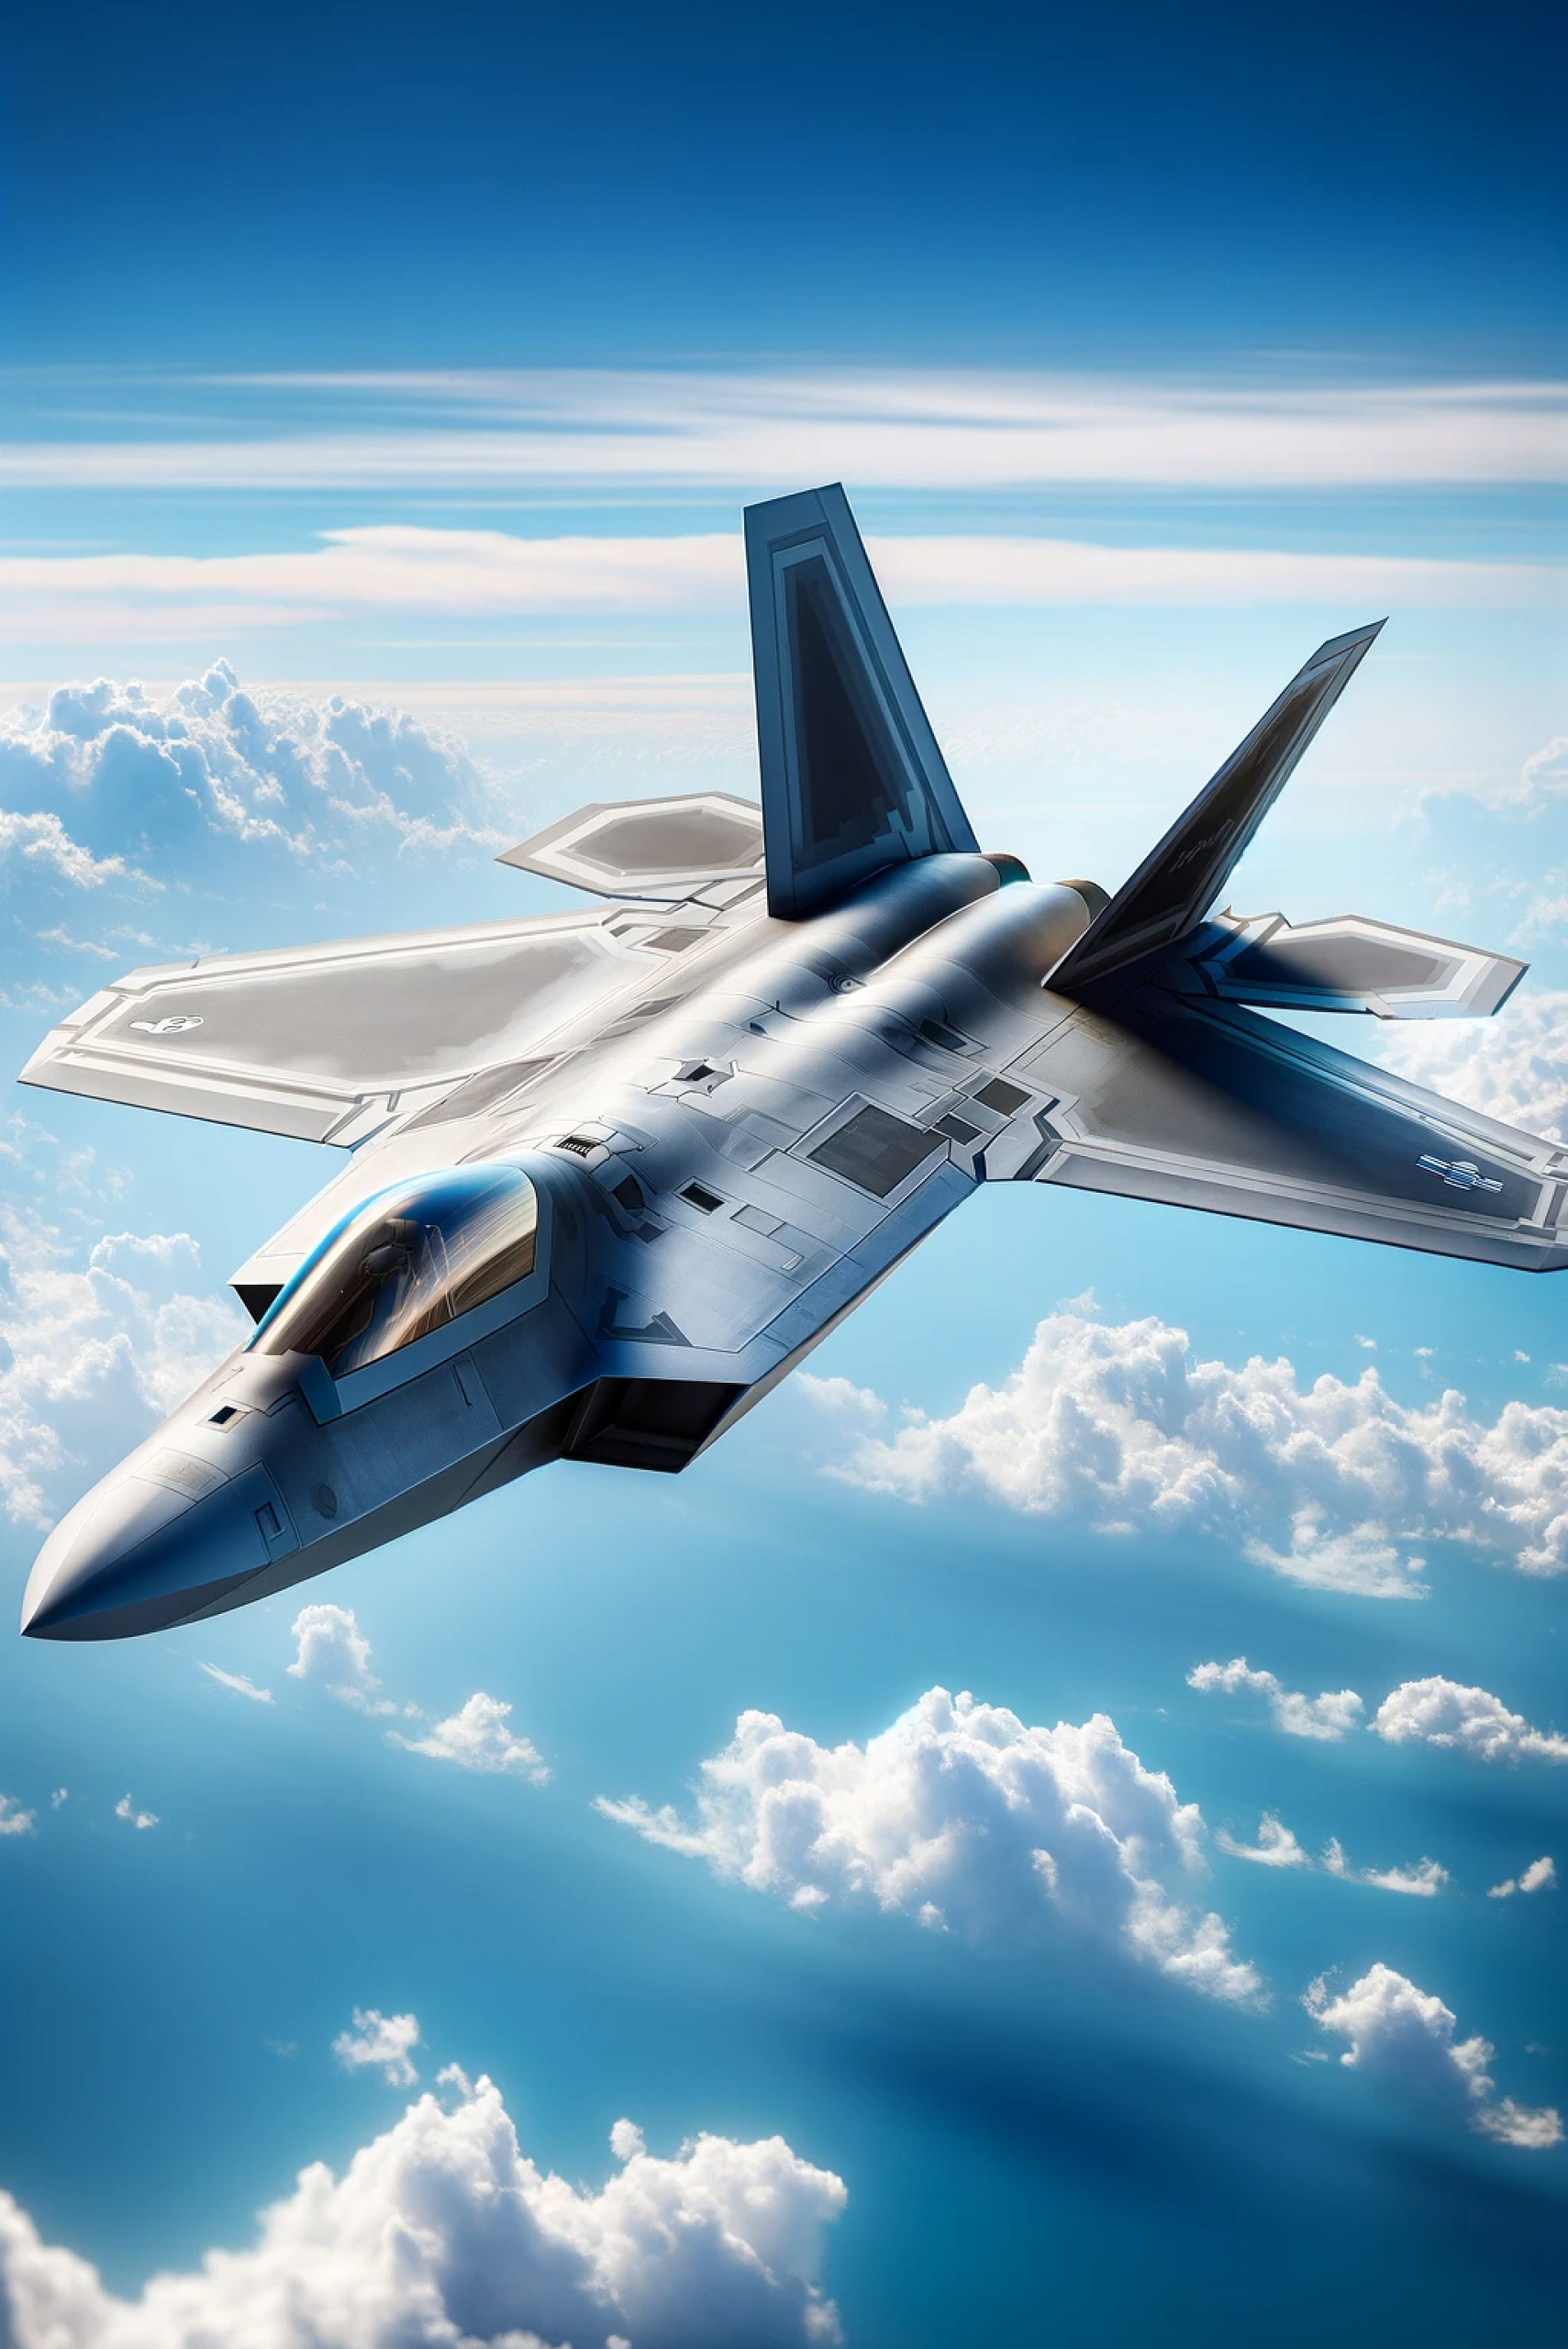 DALL·E 2023-11-20 21.08.50 - A realistic depiction of a United States Air Force F-22 Raptor, a modern stealth fighter jet, in flight against a clear sky. The aircraft is shown in